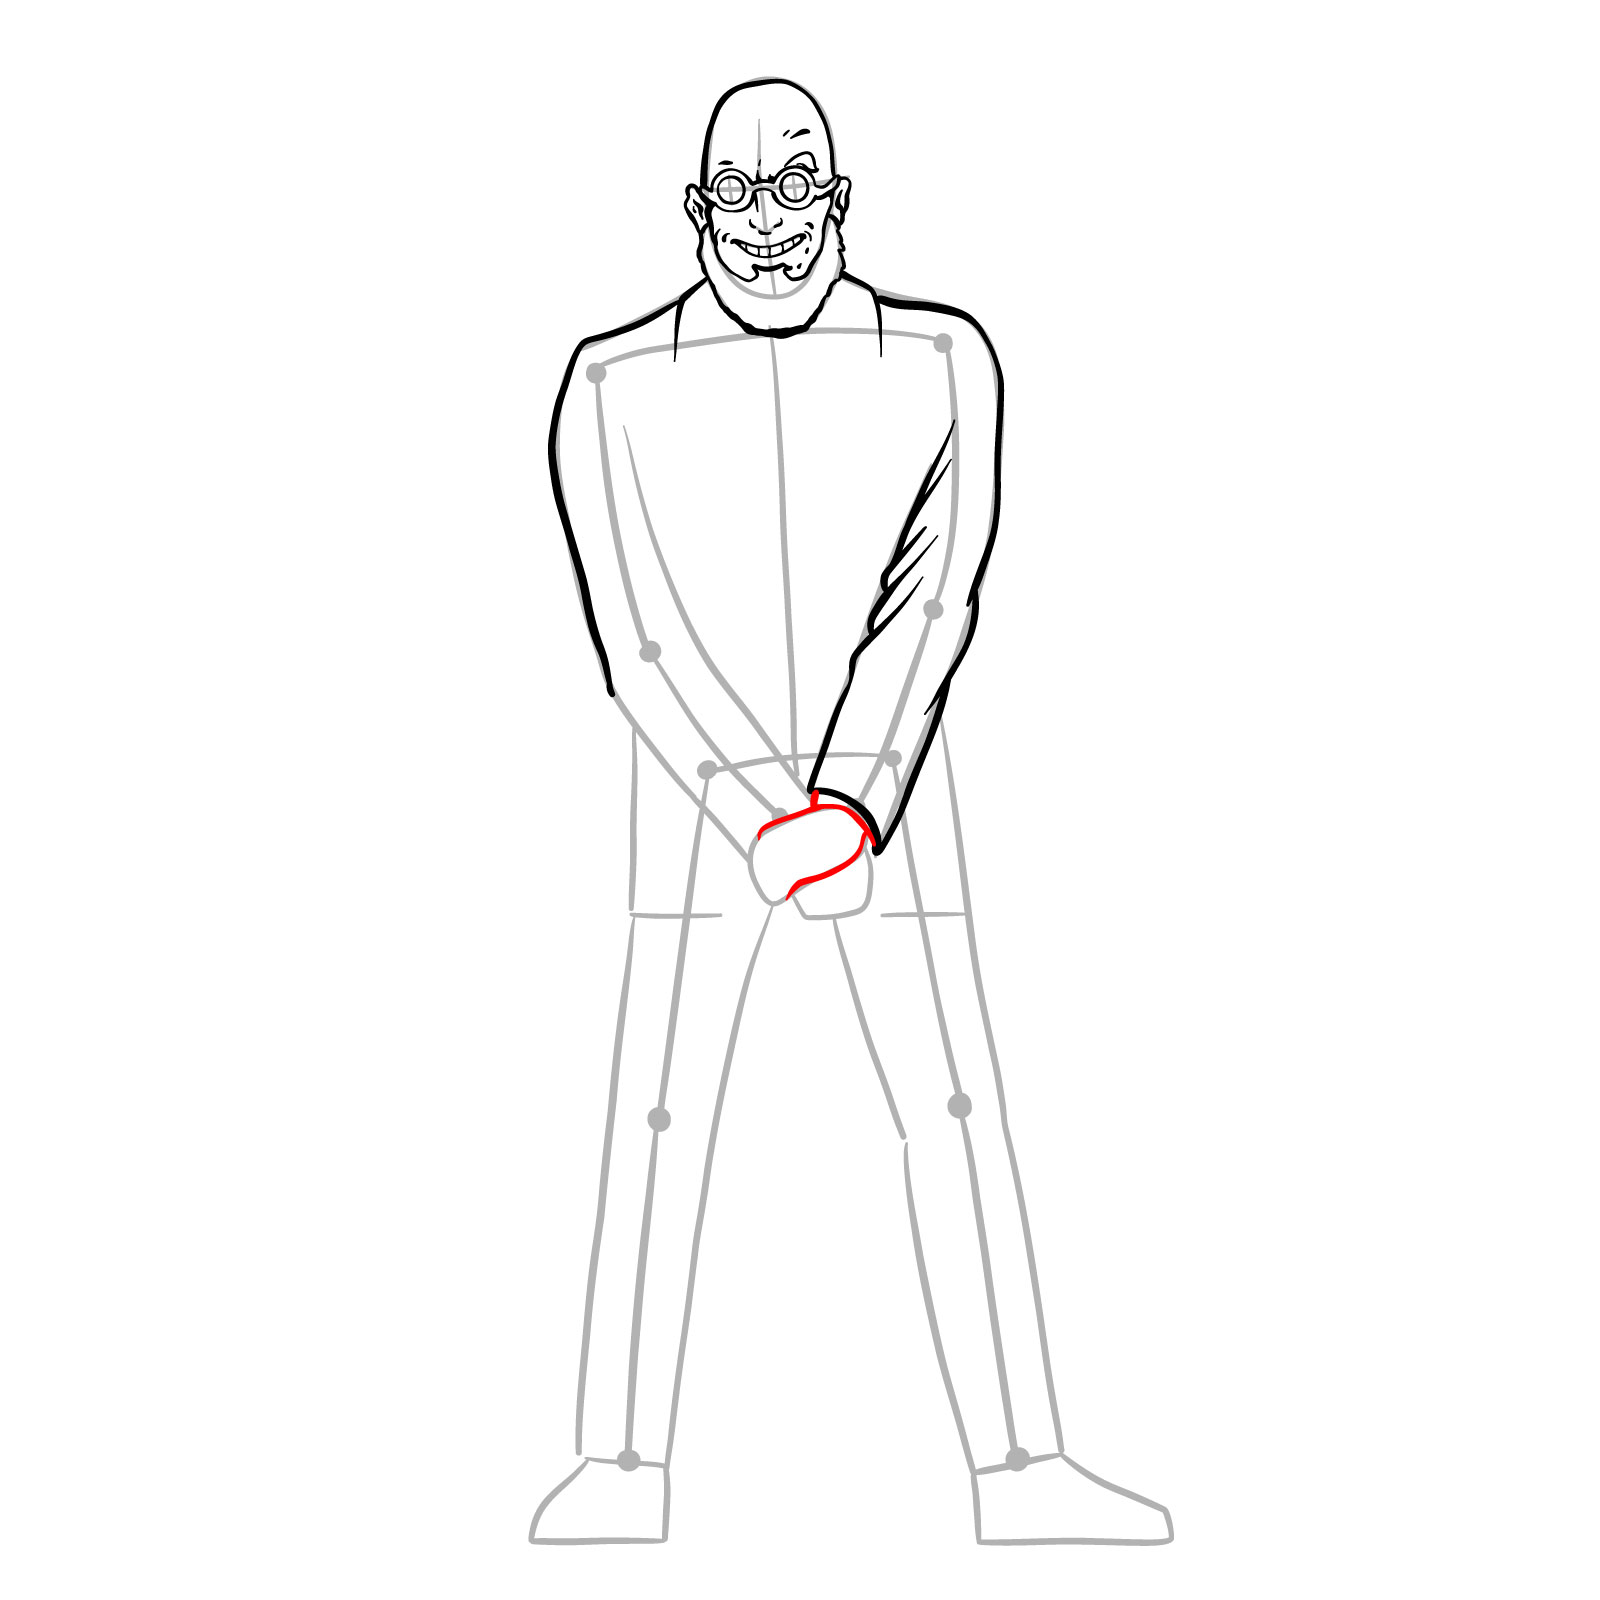 How to draw Dr. Hugo Strange from DC Comics - step 18